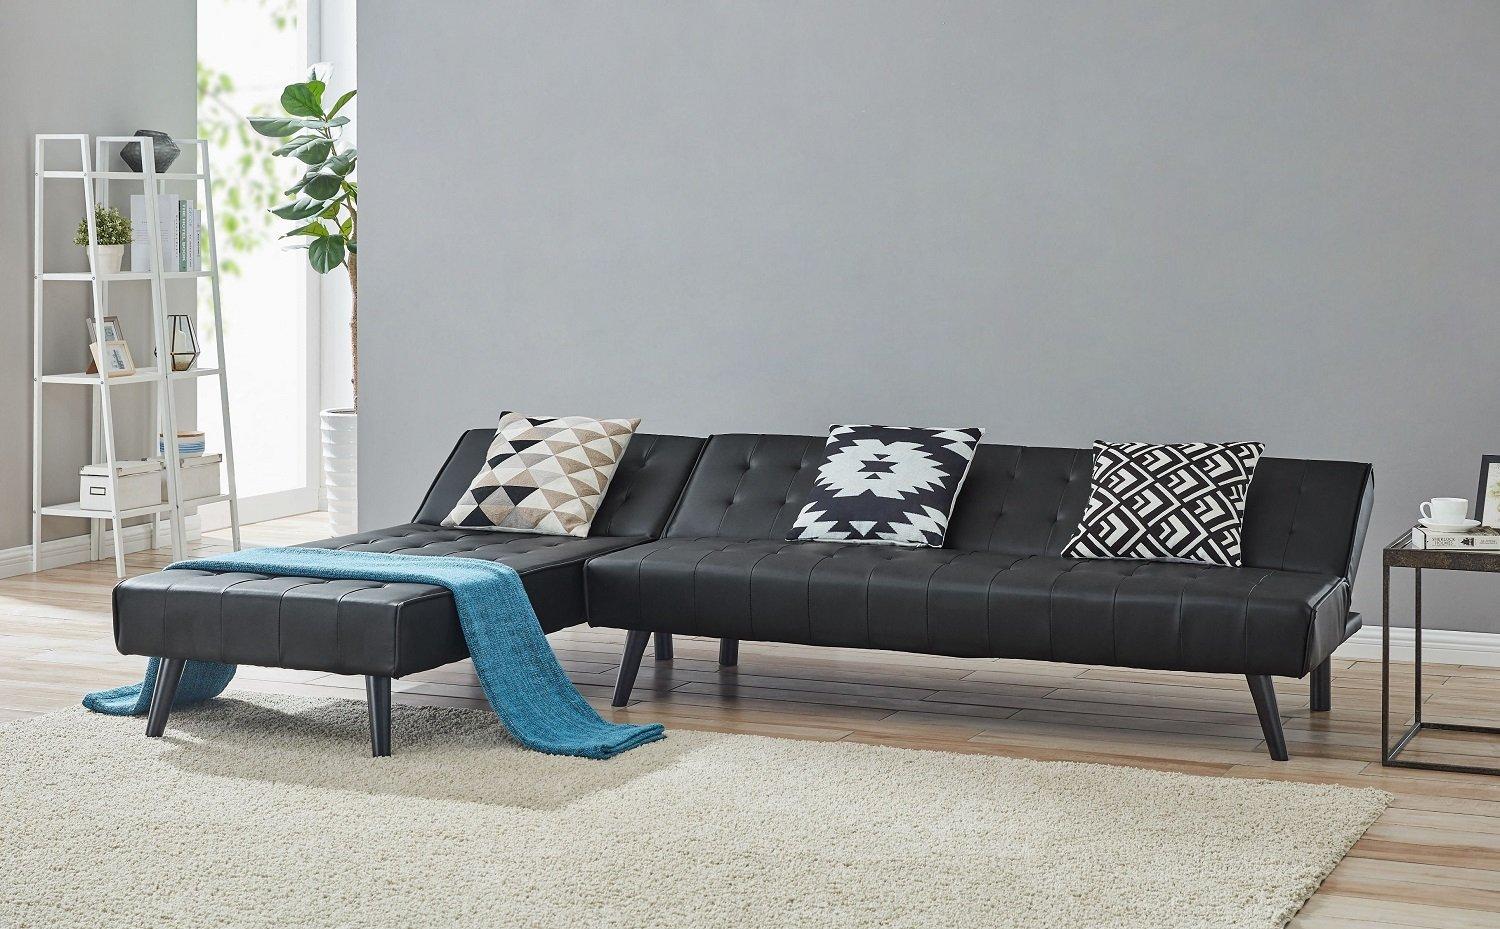 Dawson L-Shaped Faux Leather Sofa Bed With Tufted Detail and Chaise Section and Black Legs